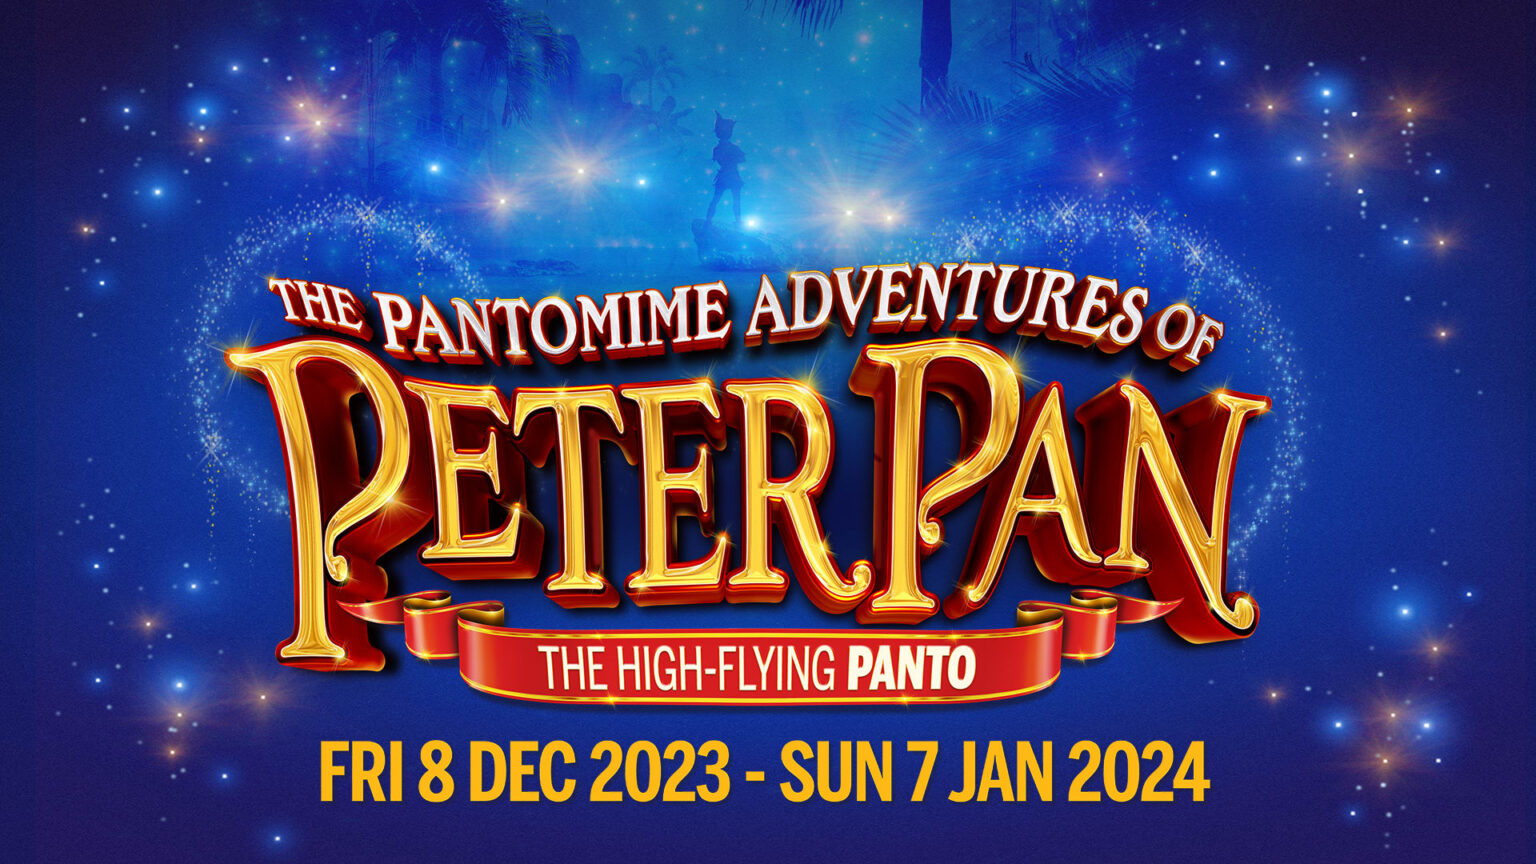 The Pantomime Adventures of Peter Pan New Victoria Theatre, Woking